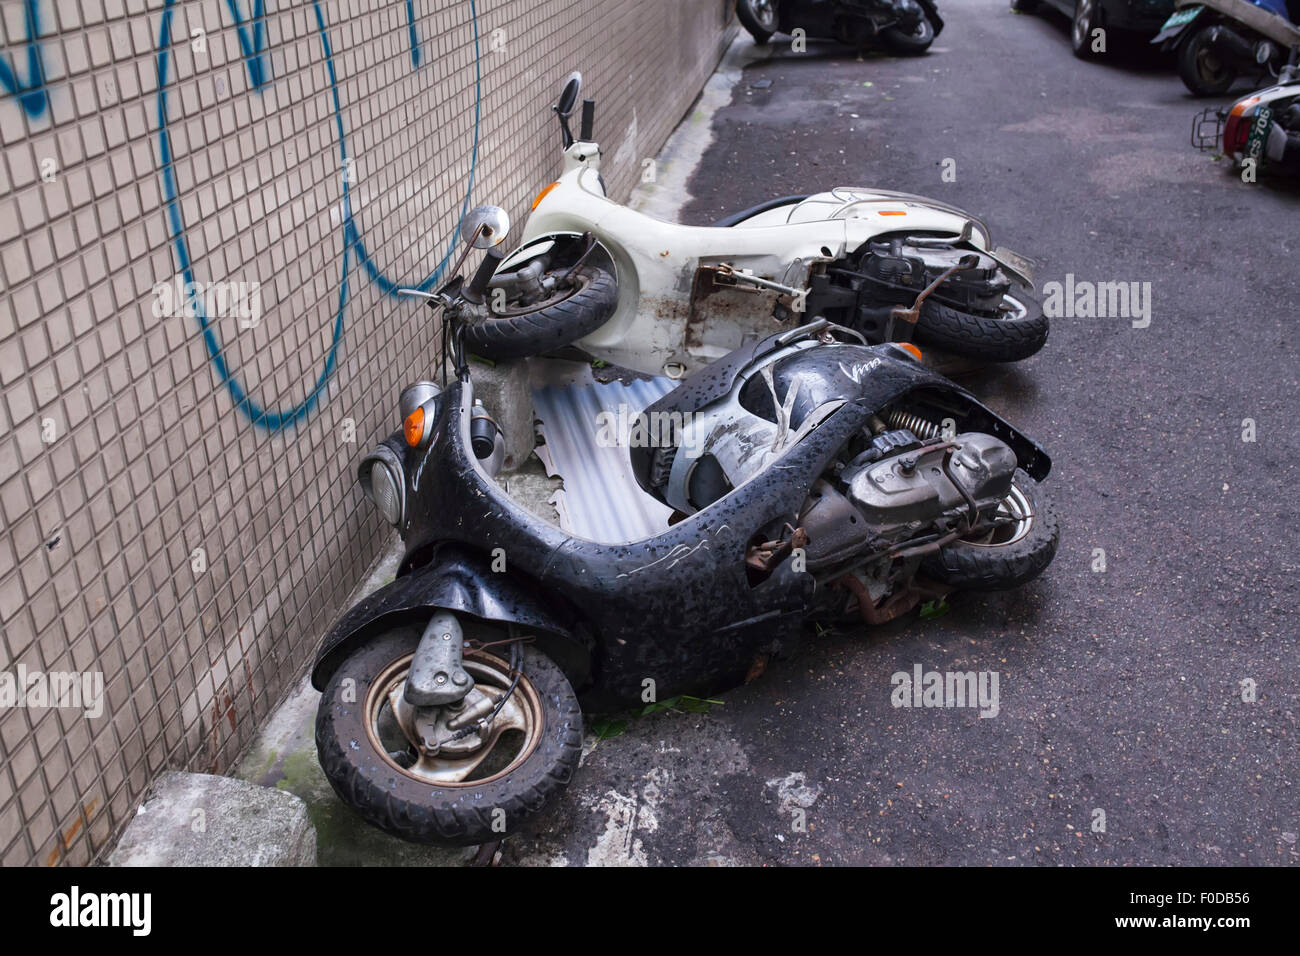 Motor scooters blown over by enormous winds from Typhoon Soudelor in Taipei, Taiwan, August 8, 2015. Super typhoon Soudelor was the biggest storm of the year hitting Taiwan on Friday night and bringing heavy rains with strong winds reaching speed of 120 mph. Stock Photo